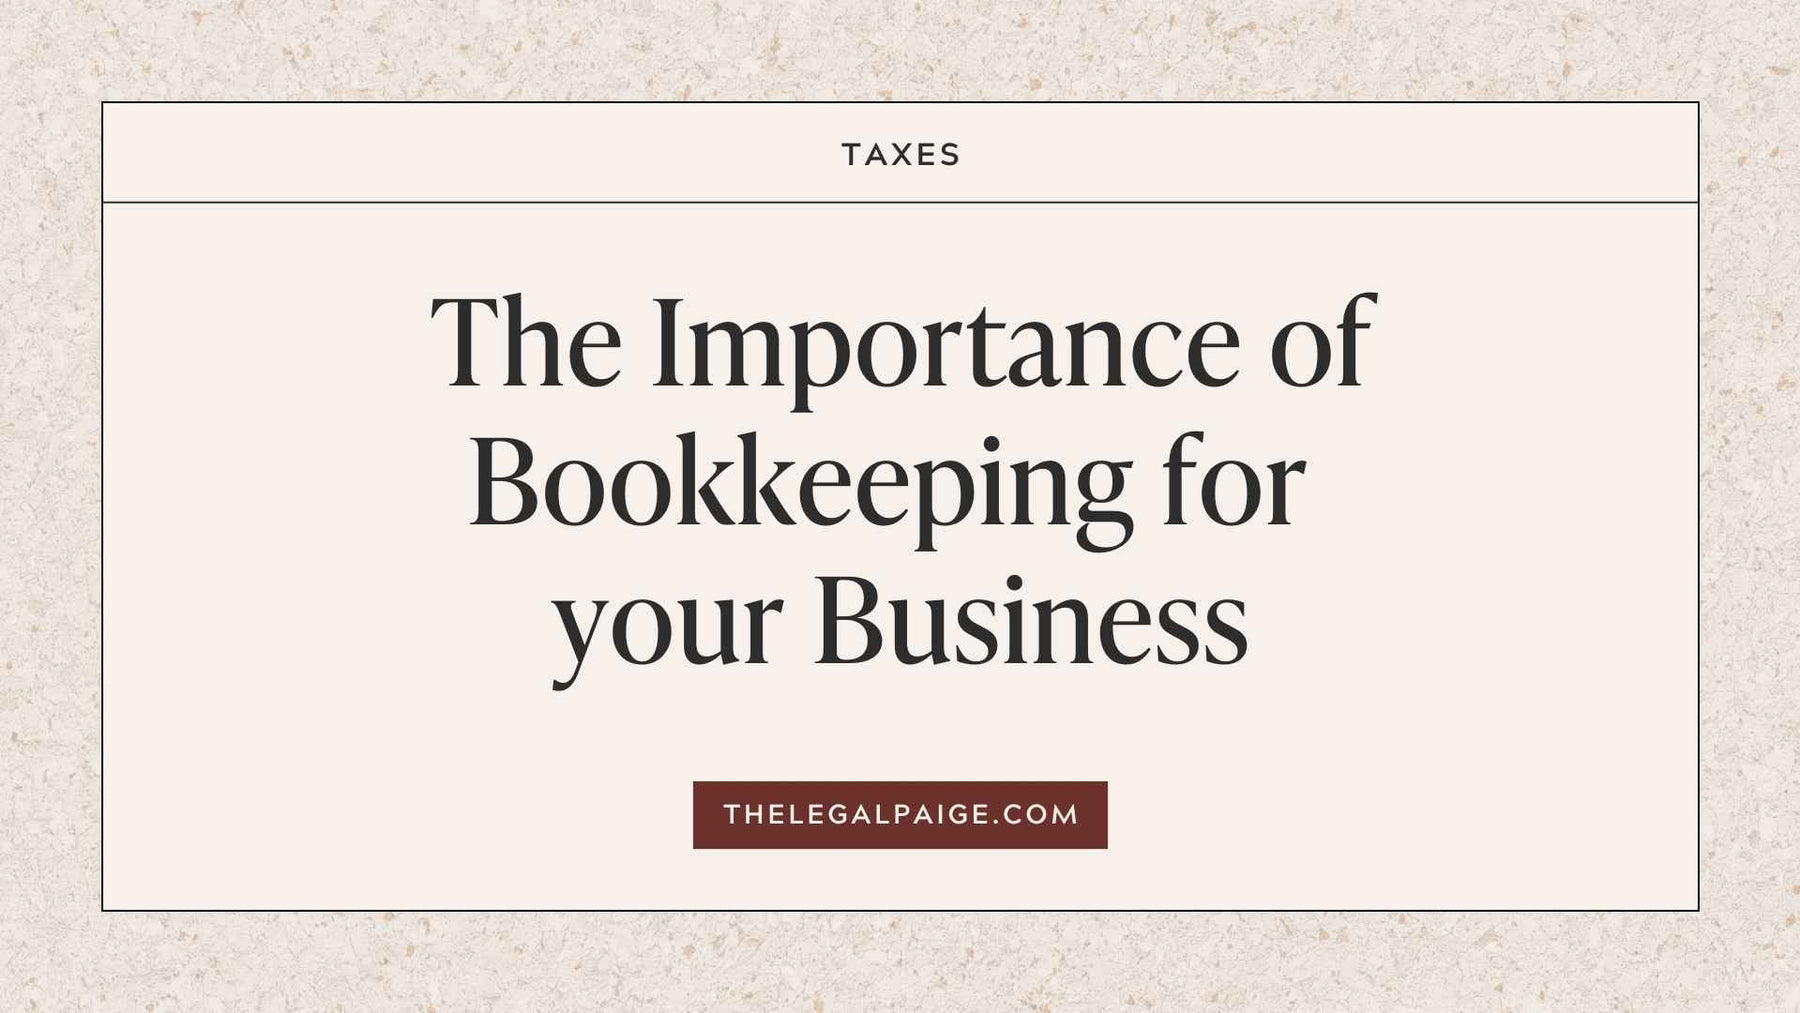 The Legal Paige - The Importance of Bookkeeping For Your Business